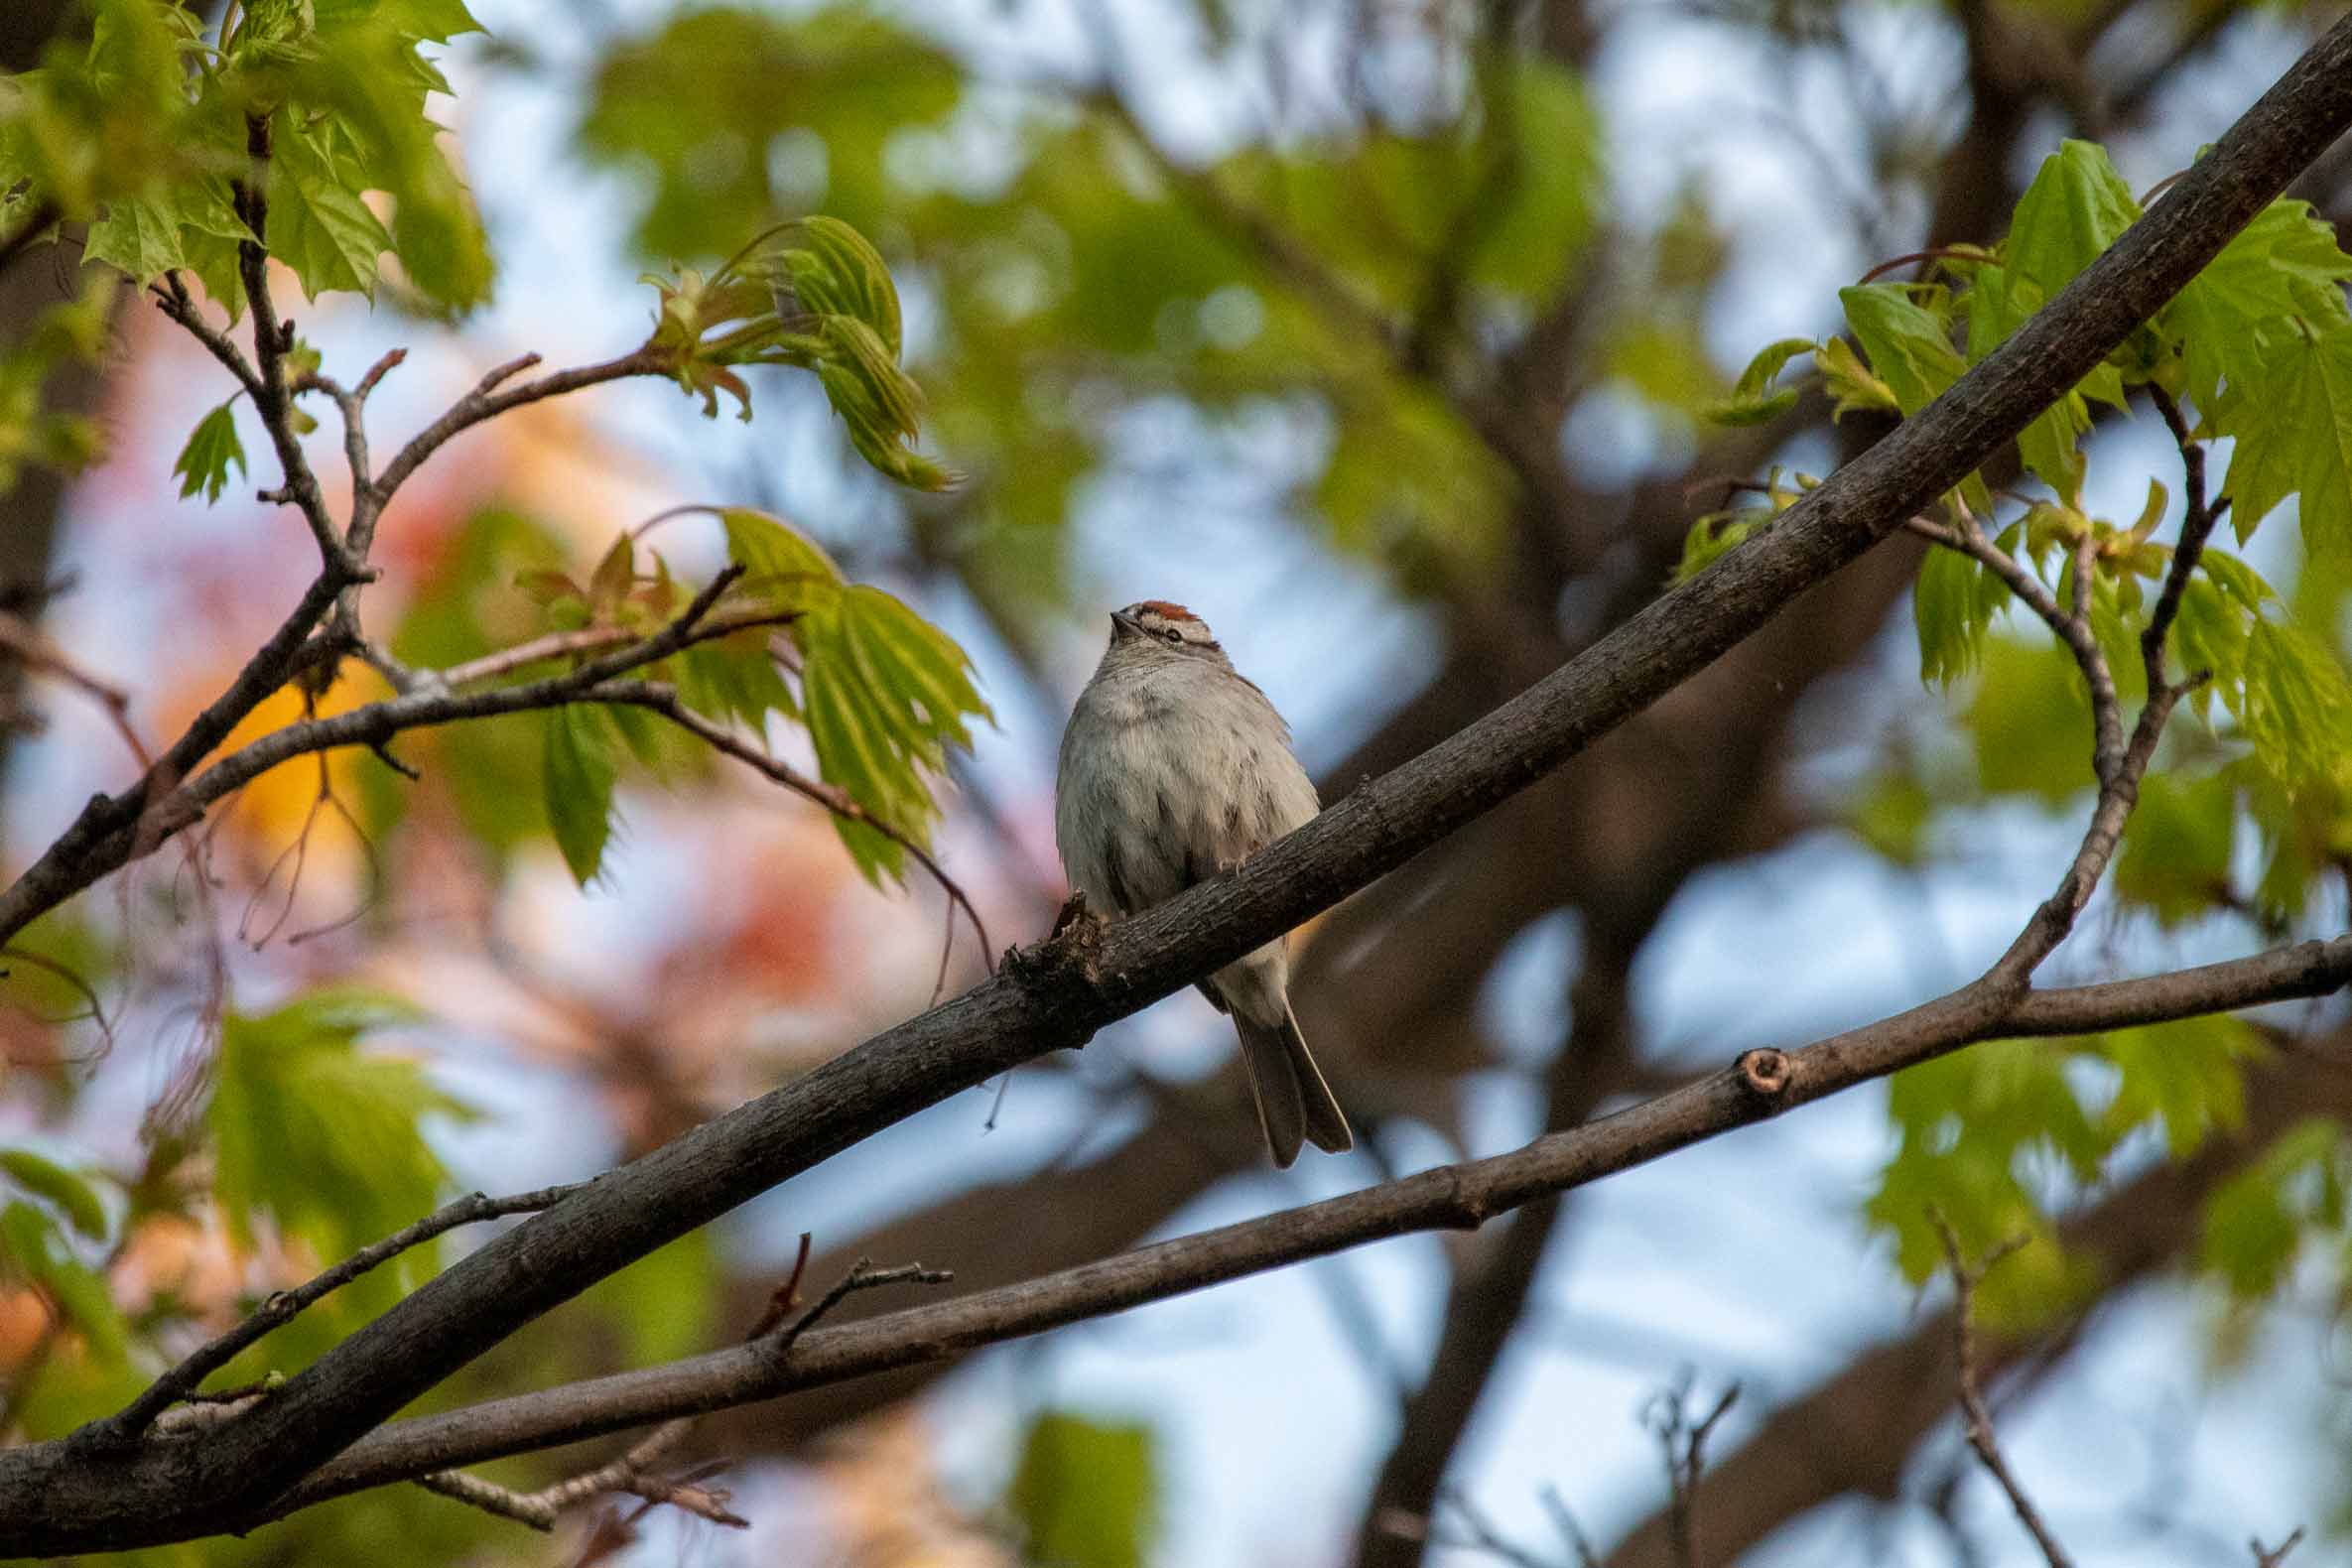 Sparrow sitting in a tree